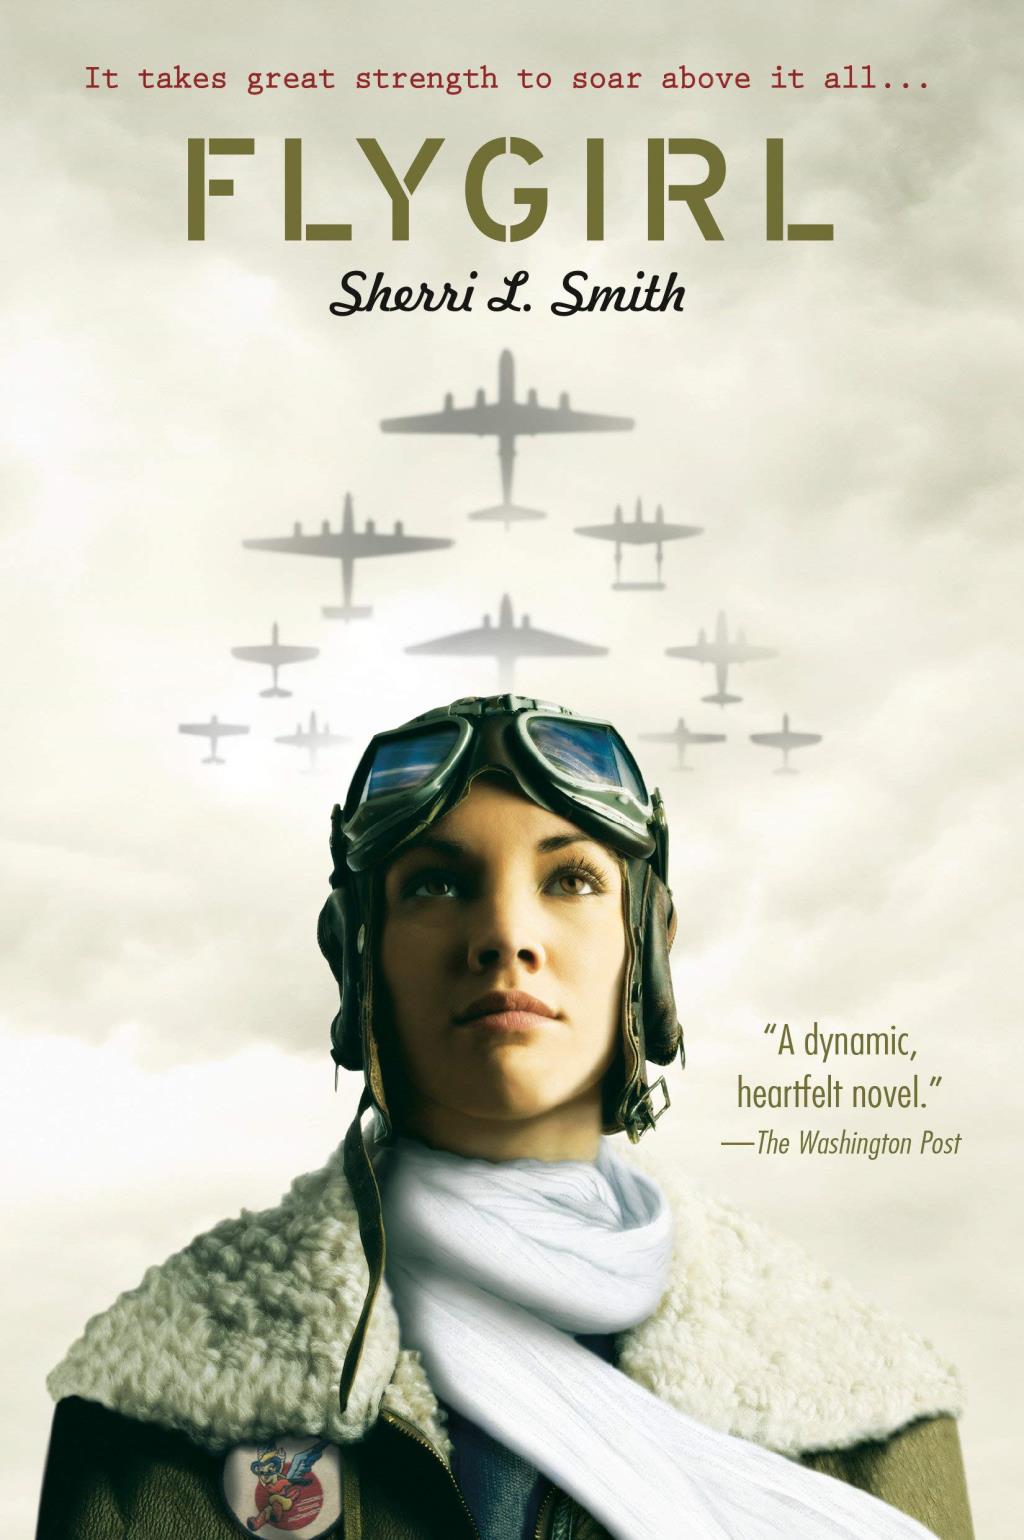 flygirl book cover